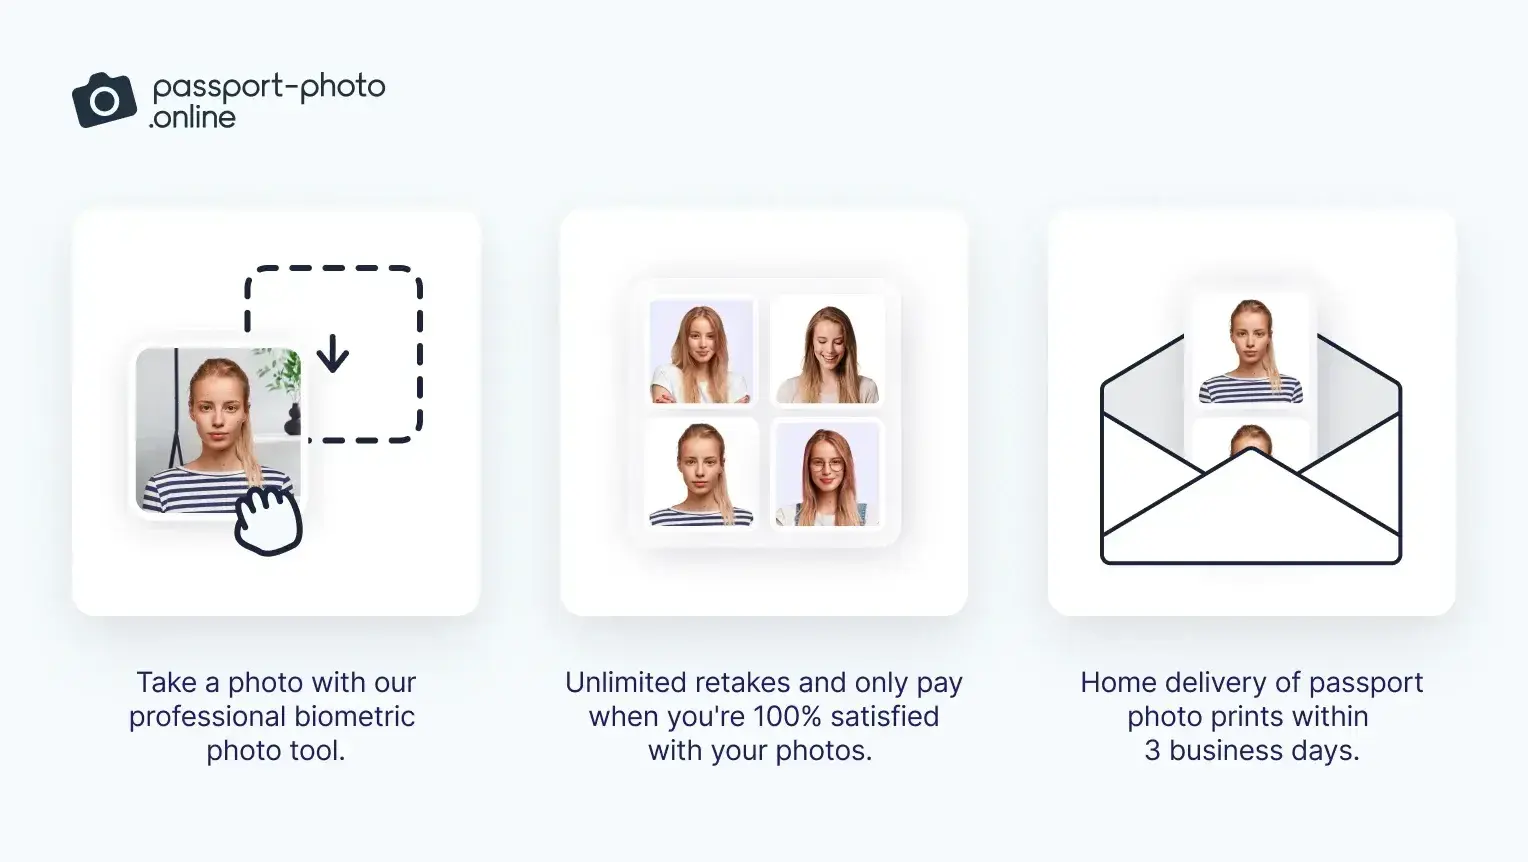 Follow Passport Photo Online’s 3-step process for cheap passport photo prints delivered directly to your door.